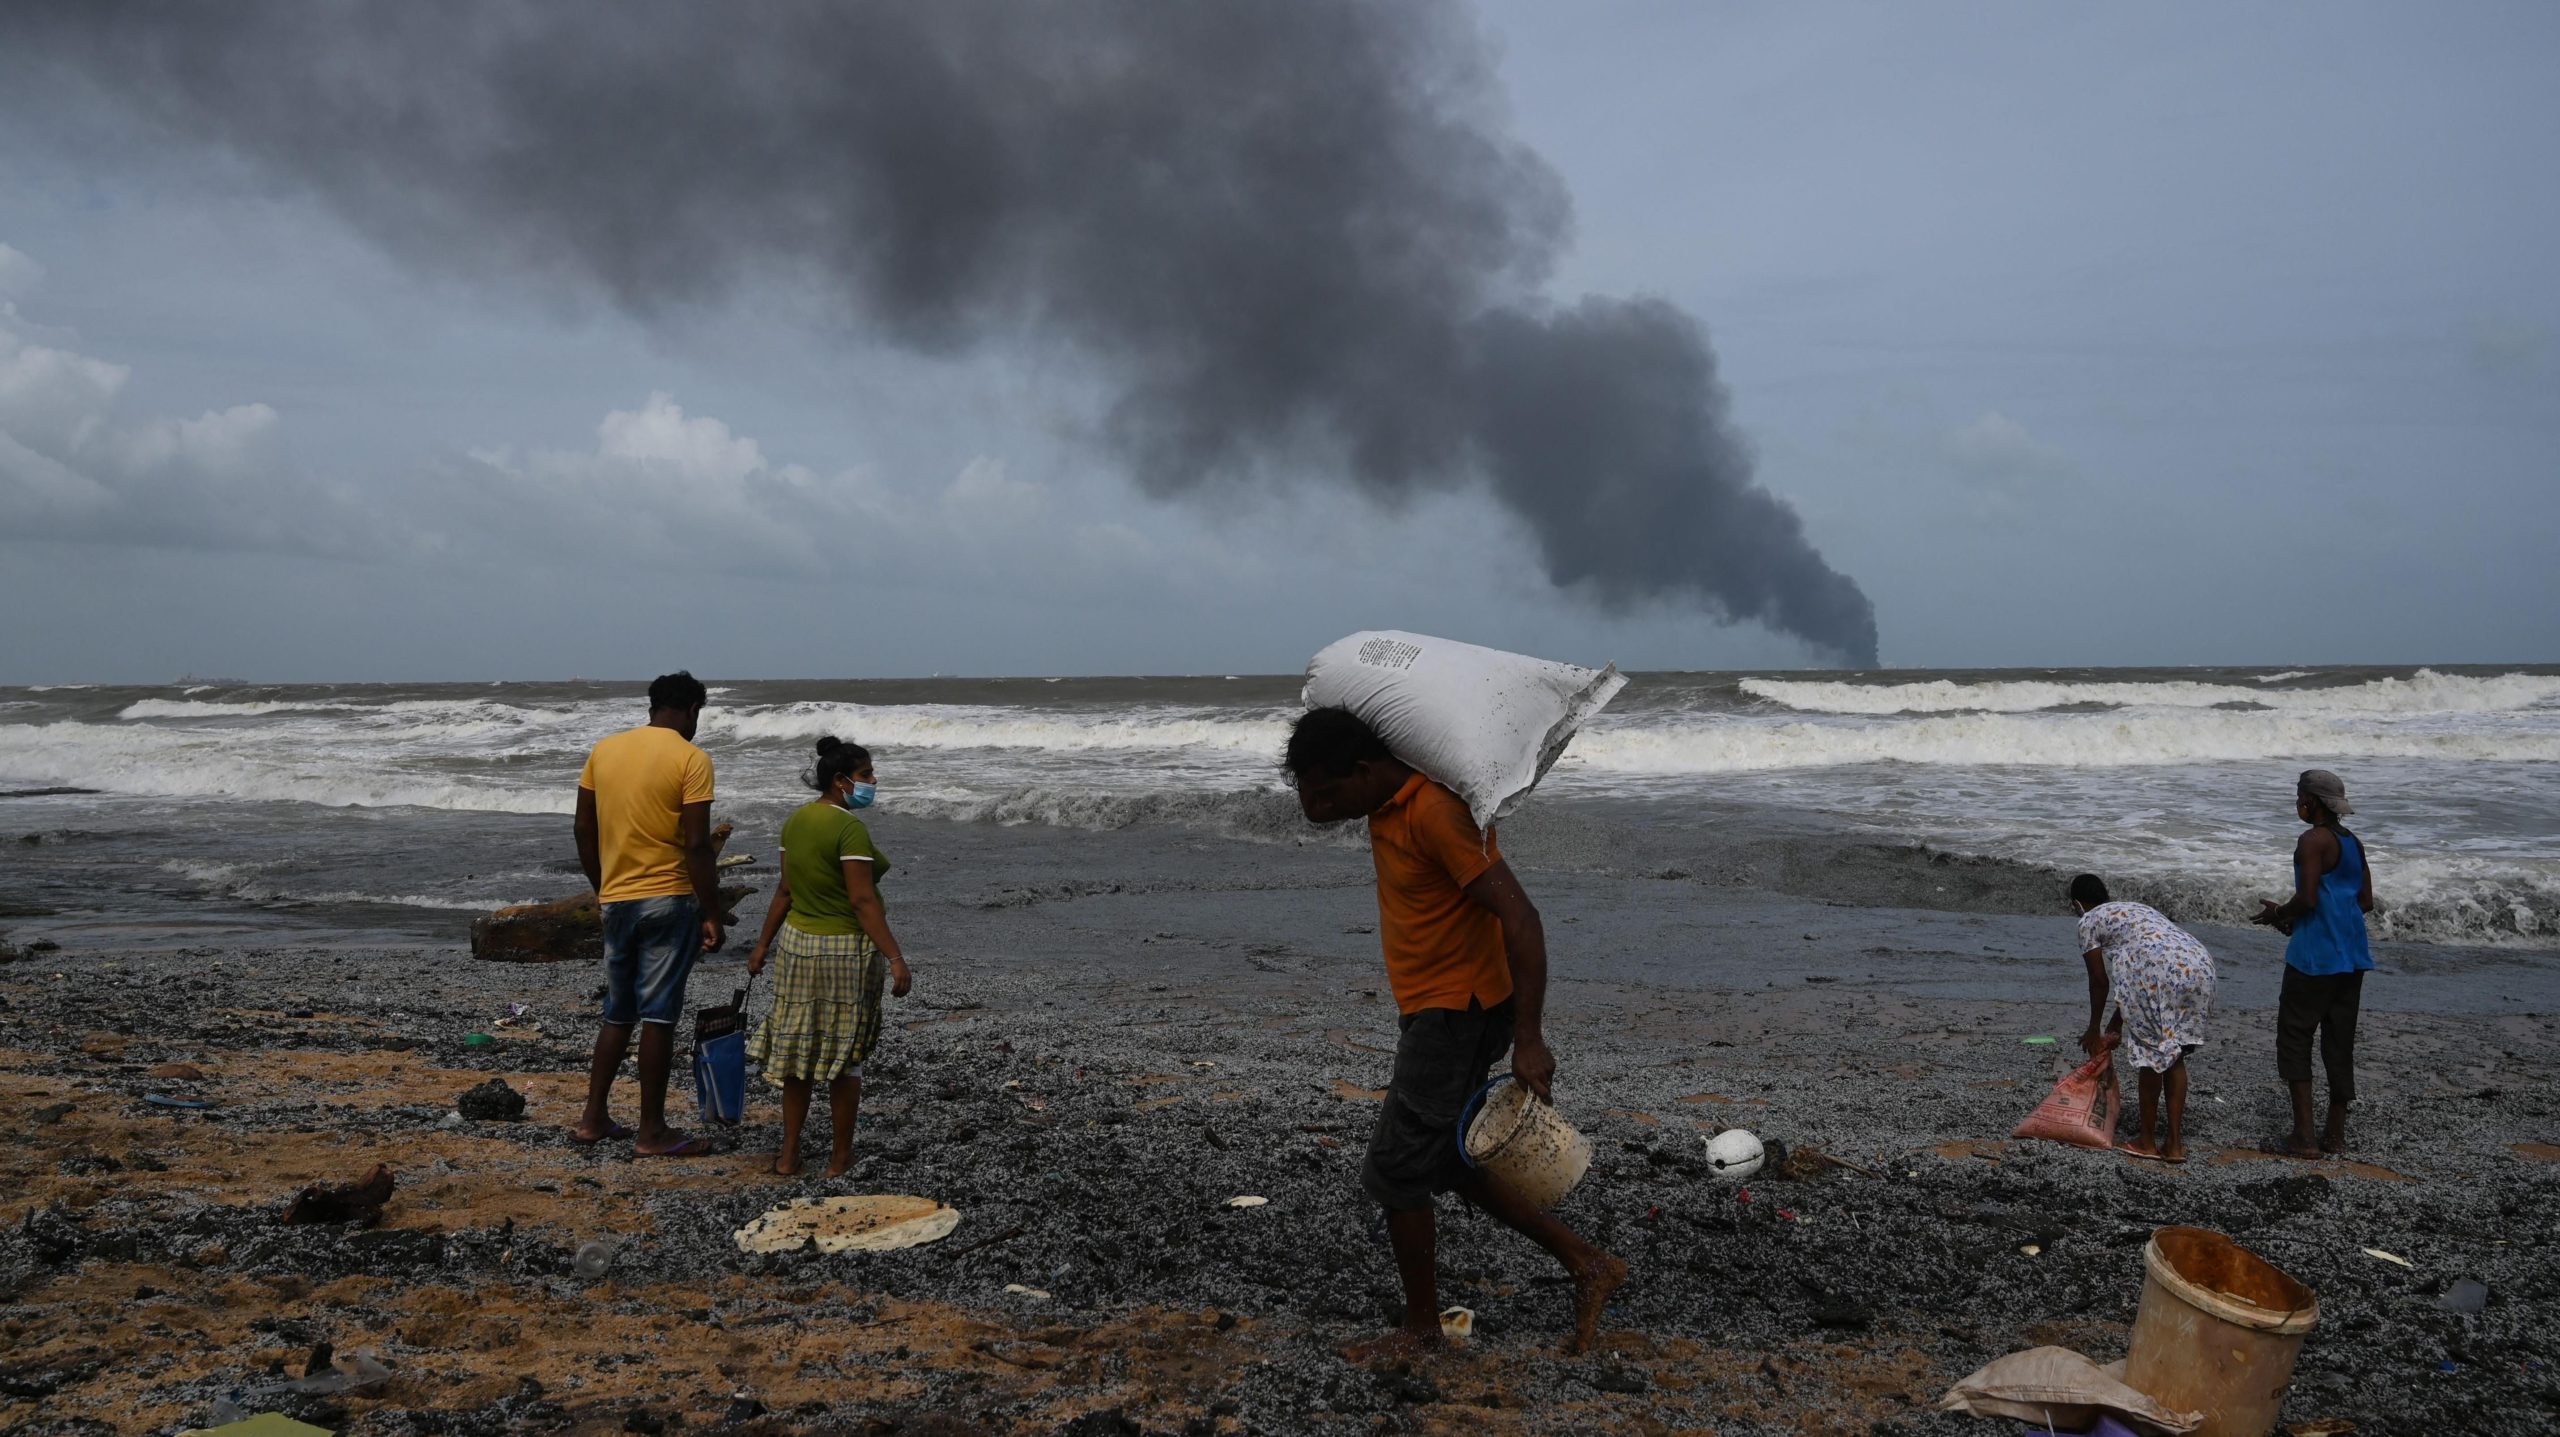 Residents collect debris from the burning ship on May 26. (Photo: Lakruwan Wanniarachchi/ AFP, Getty Images)